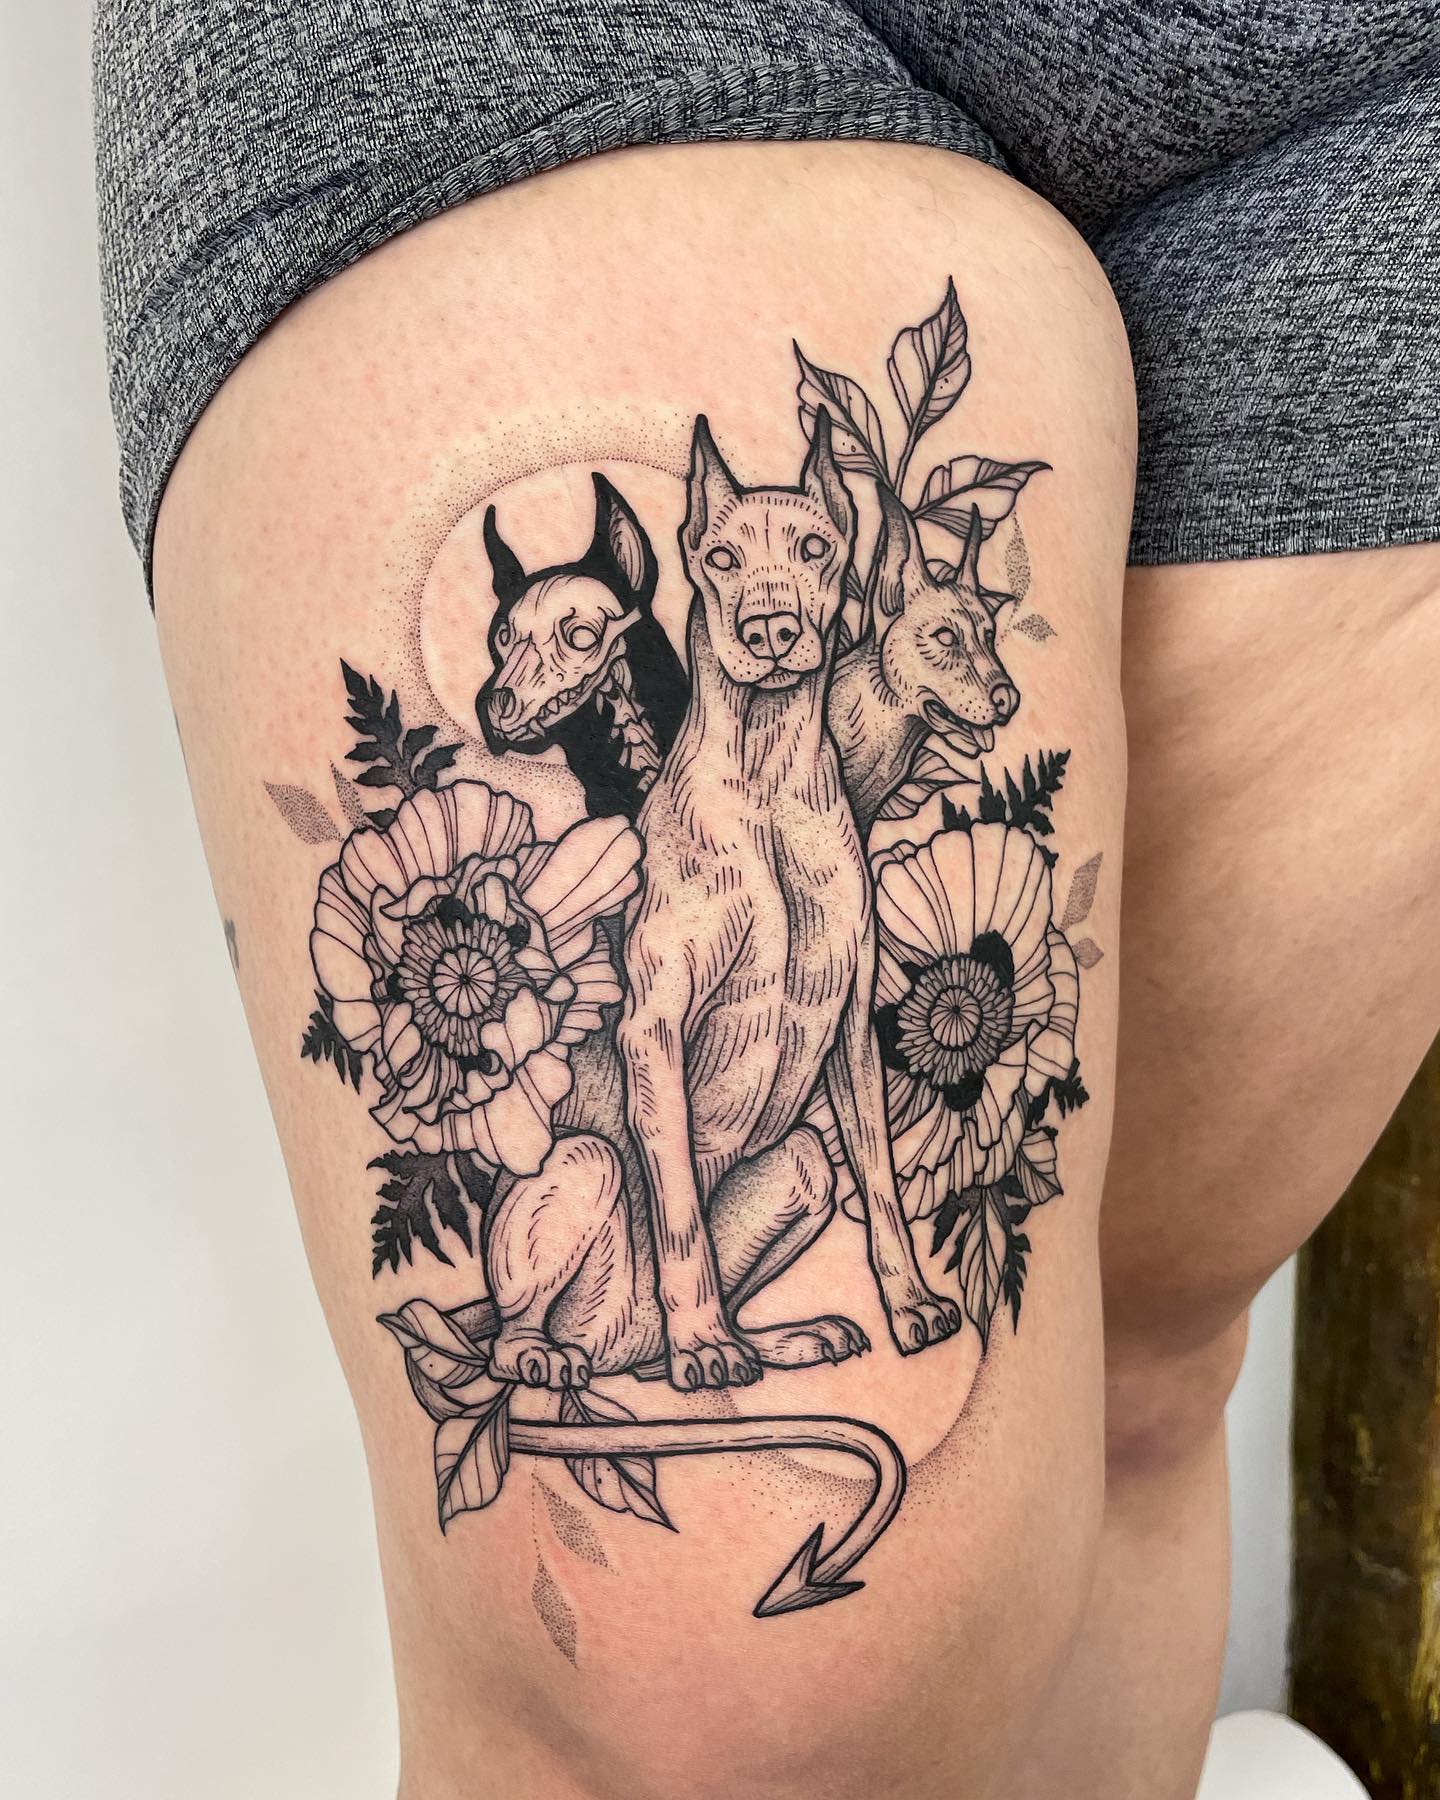 Here is the fantastic Cerberus tattoo that is surrounded by poppies and vines.